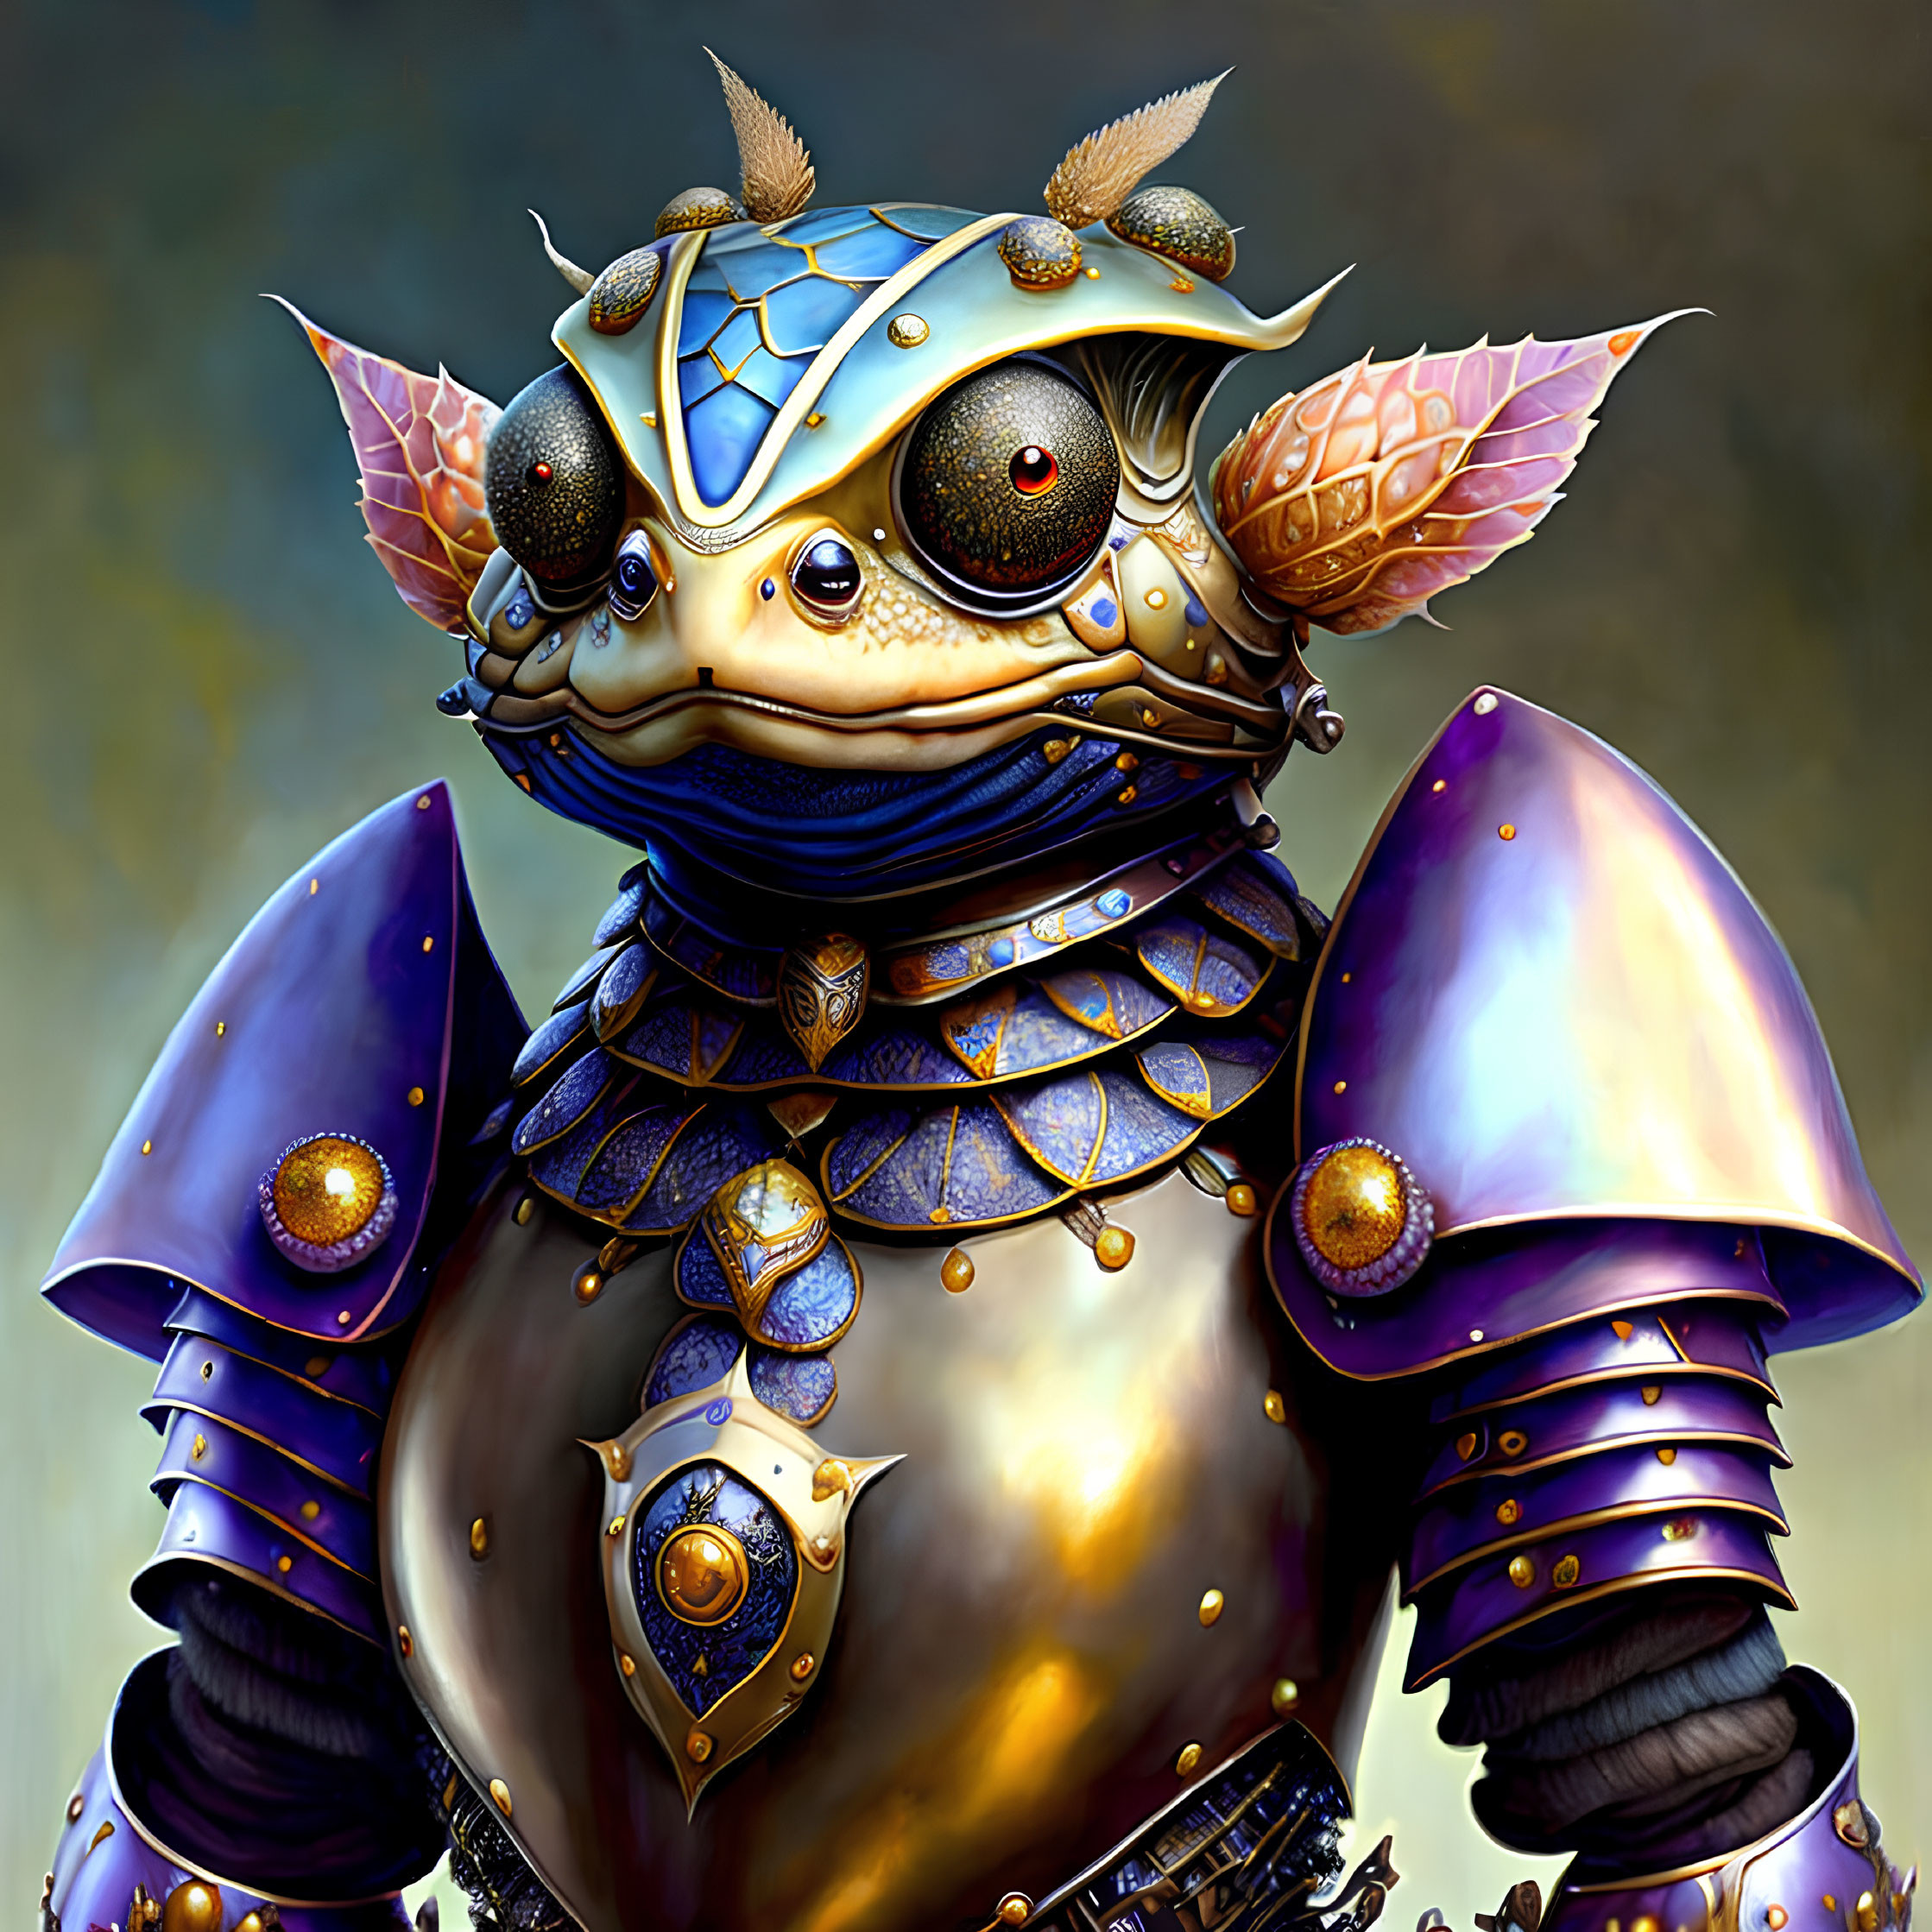 Regal frog-like creature in ornate armor with multiple eyes